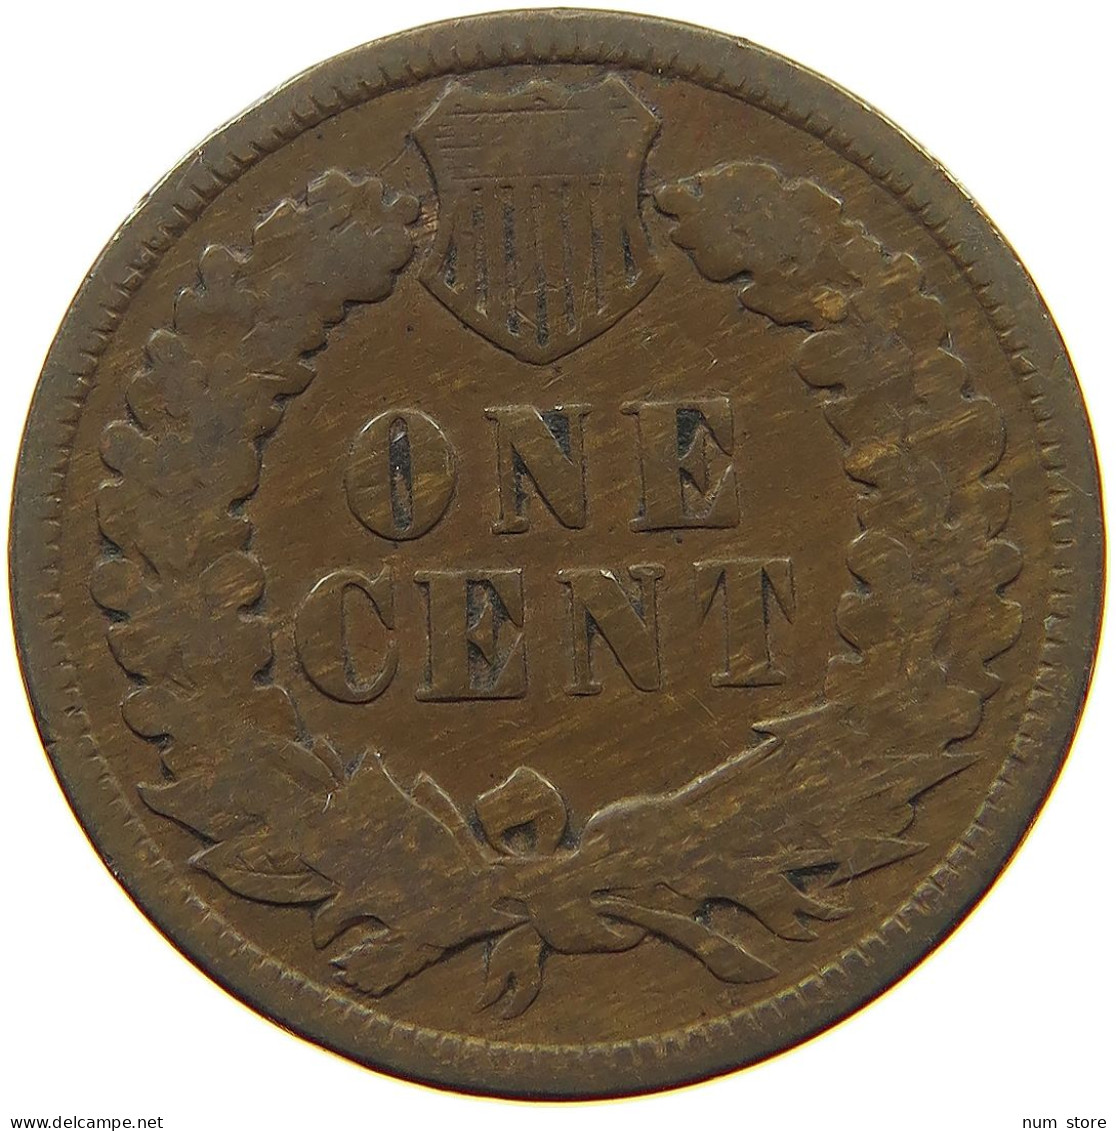 UNITED STATES OF AMERICA CENT 1890 INDIAN HEAD #s063 0321 - 1859-1909: Indian Head